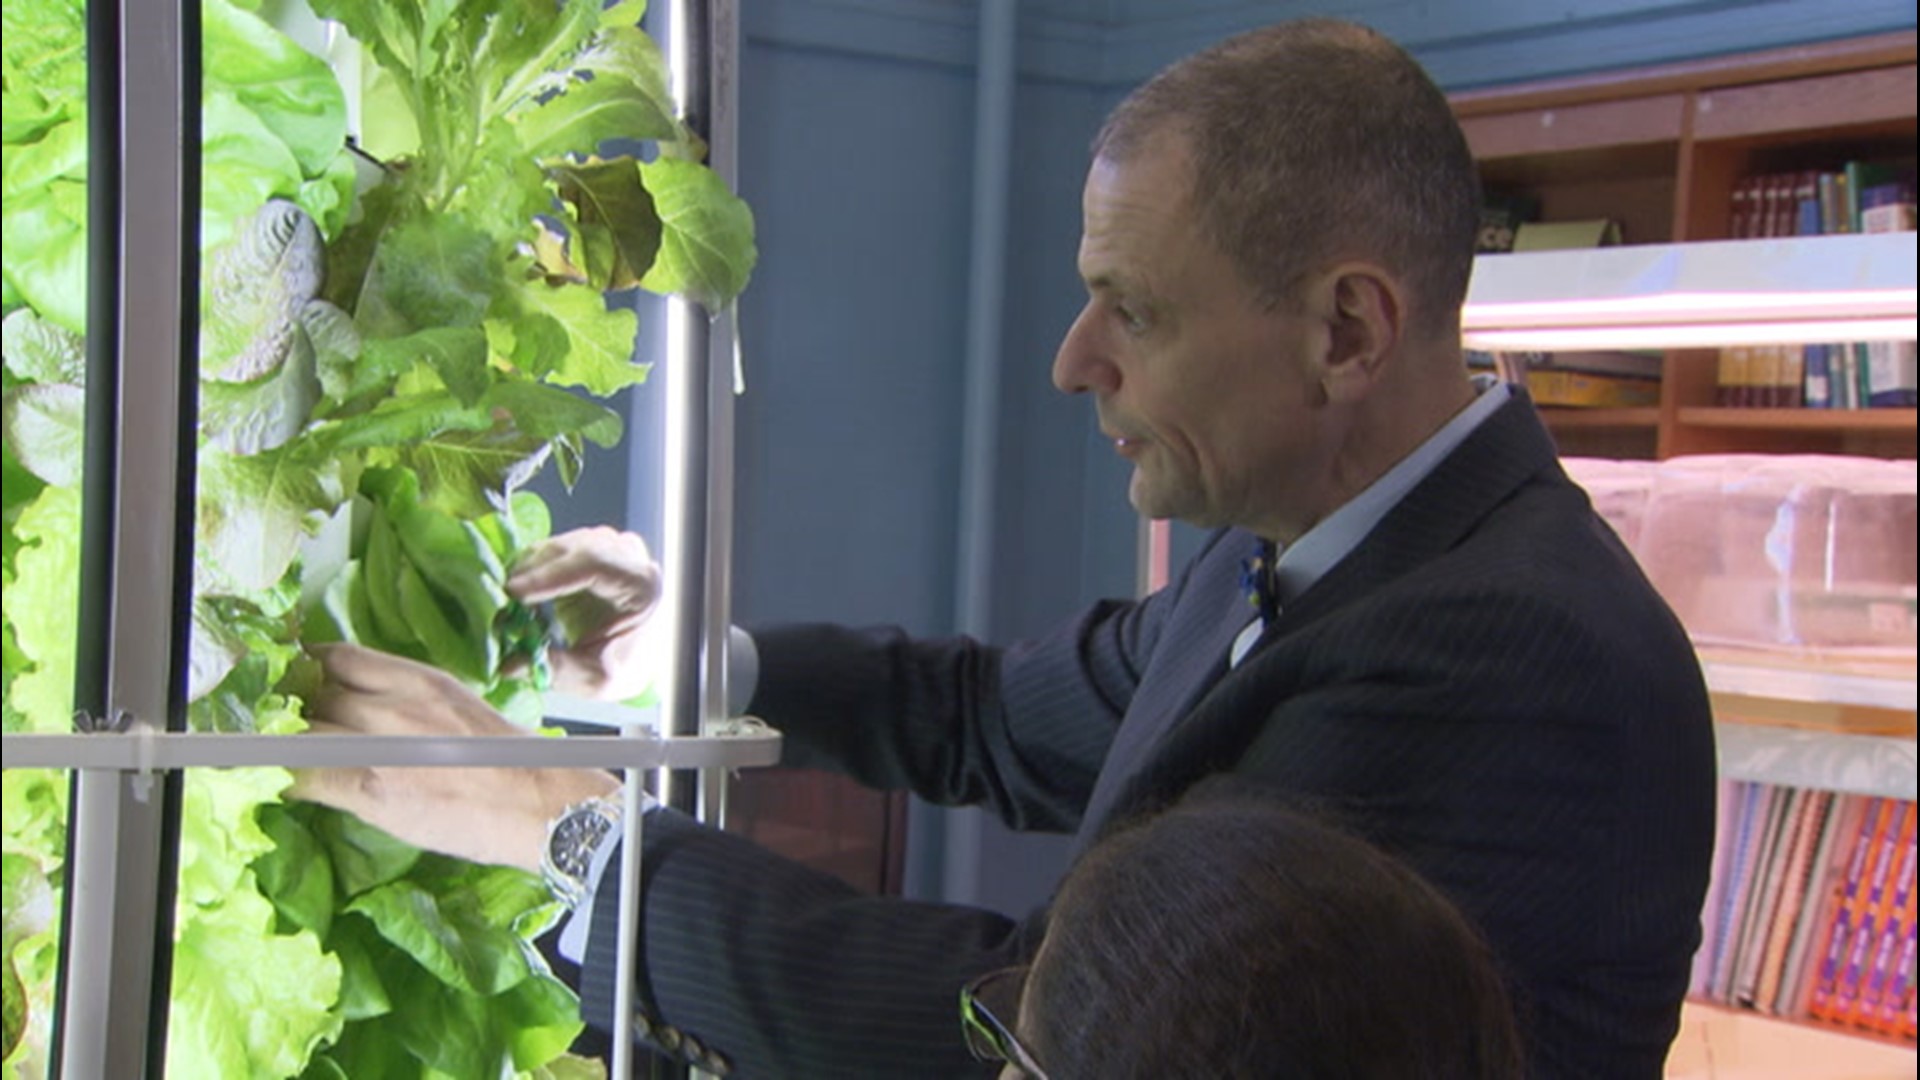 Internationally acclaimed educator Stephen Ritz has created the first edible classroom in the world. He and his students are providing food to those in need, while encouraging healthy habits and attendance in school.